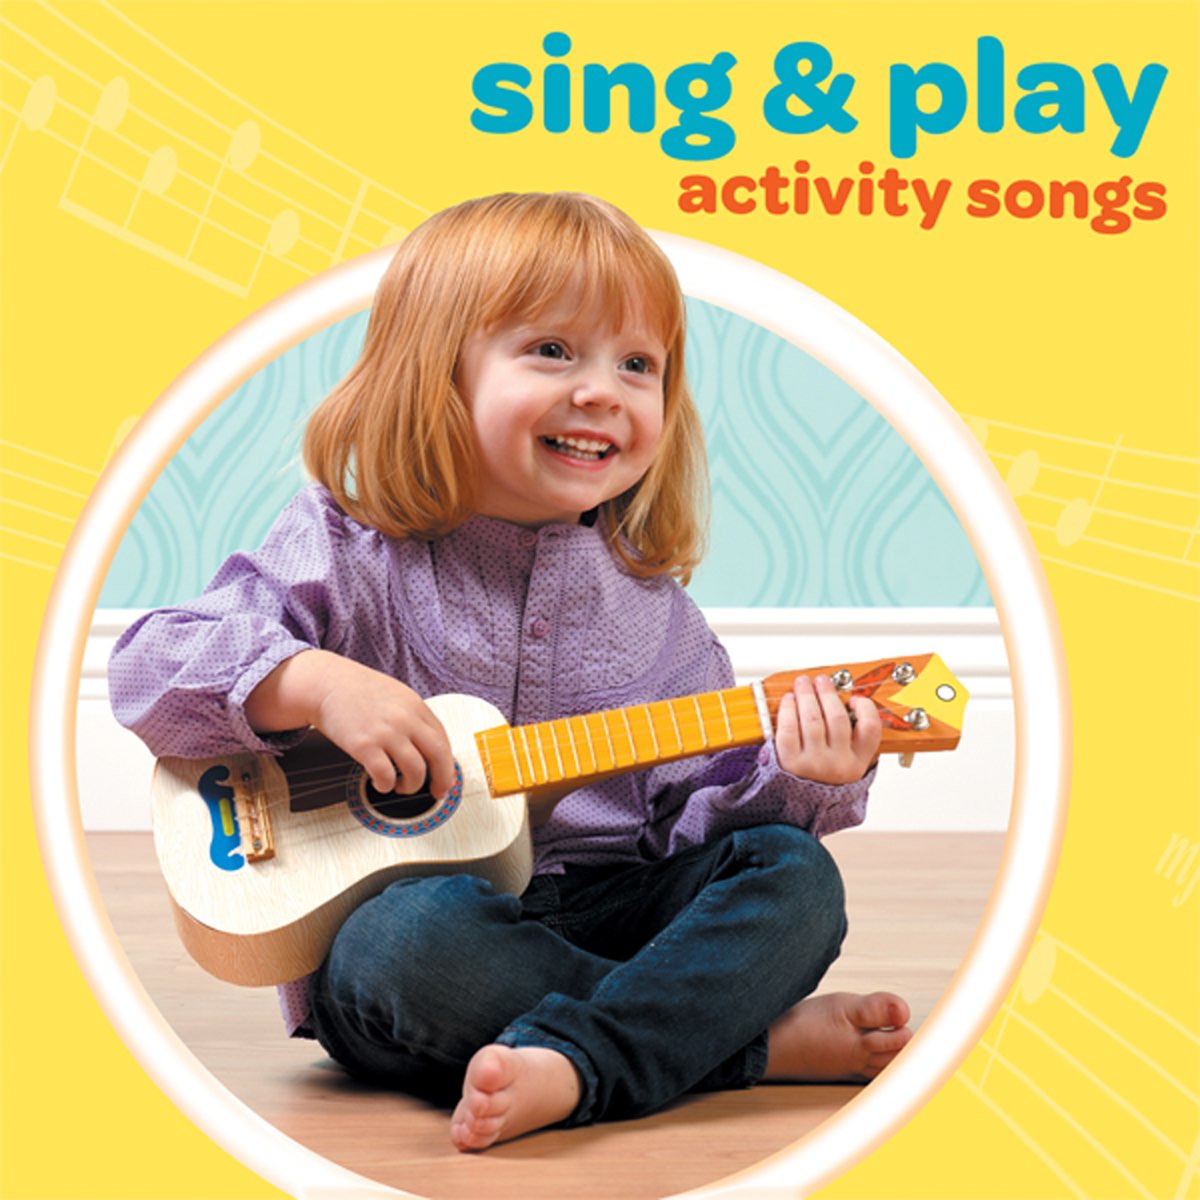 Sing and play 3. Patty Shukla. Play and Sing. 7 Sings альбом. Activity песня.